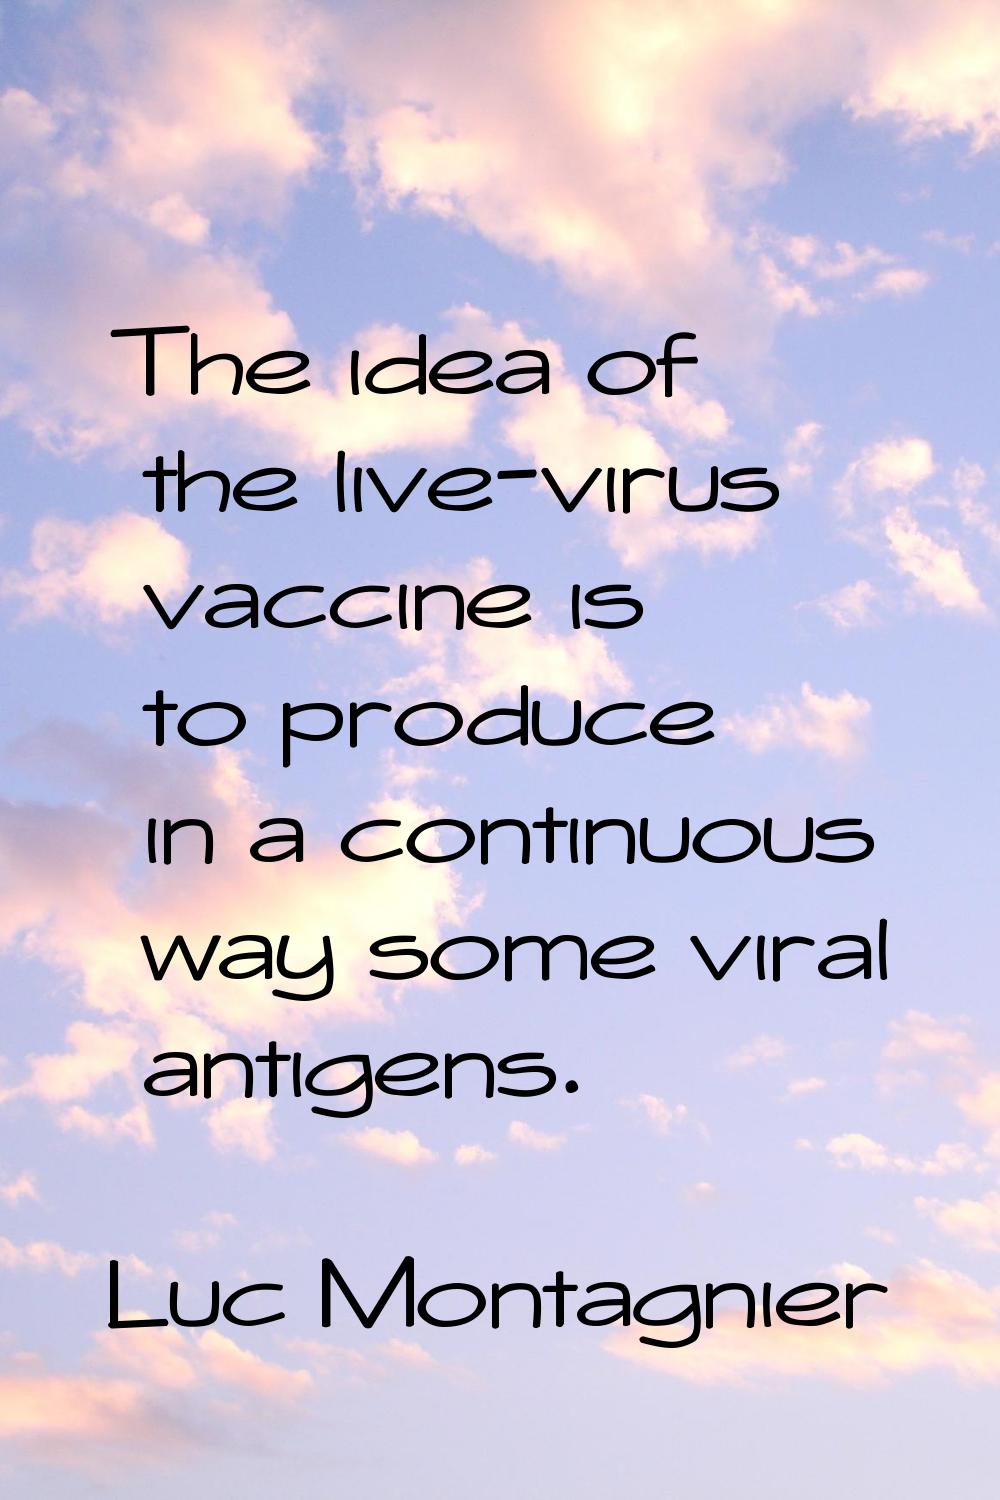 The idea of the live-virus vaccine is to produce in a continuous way some viral antigens.